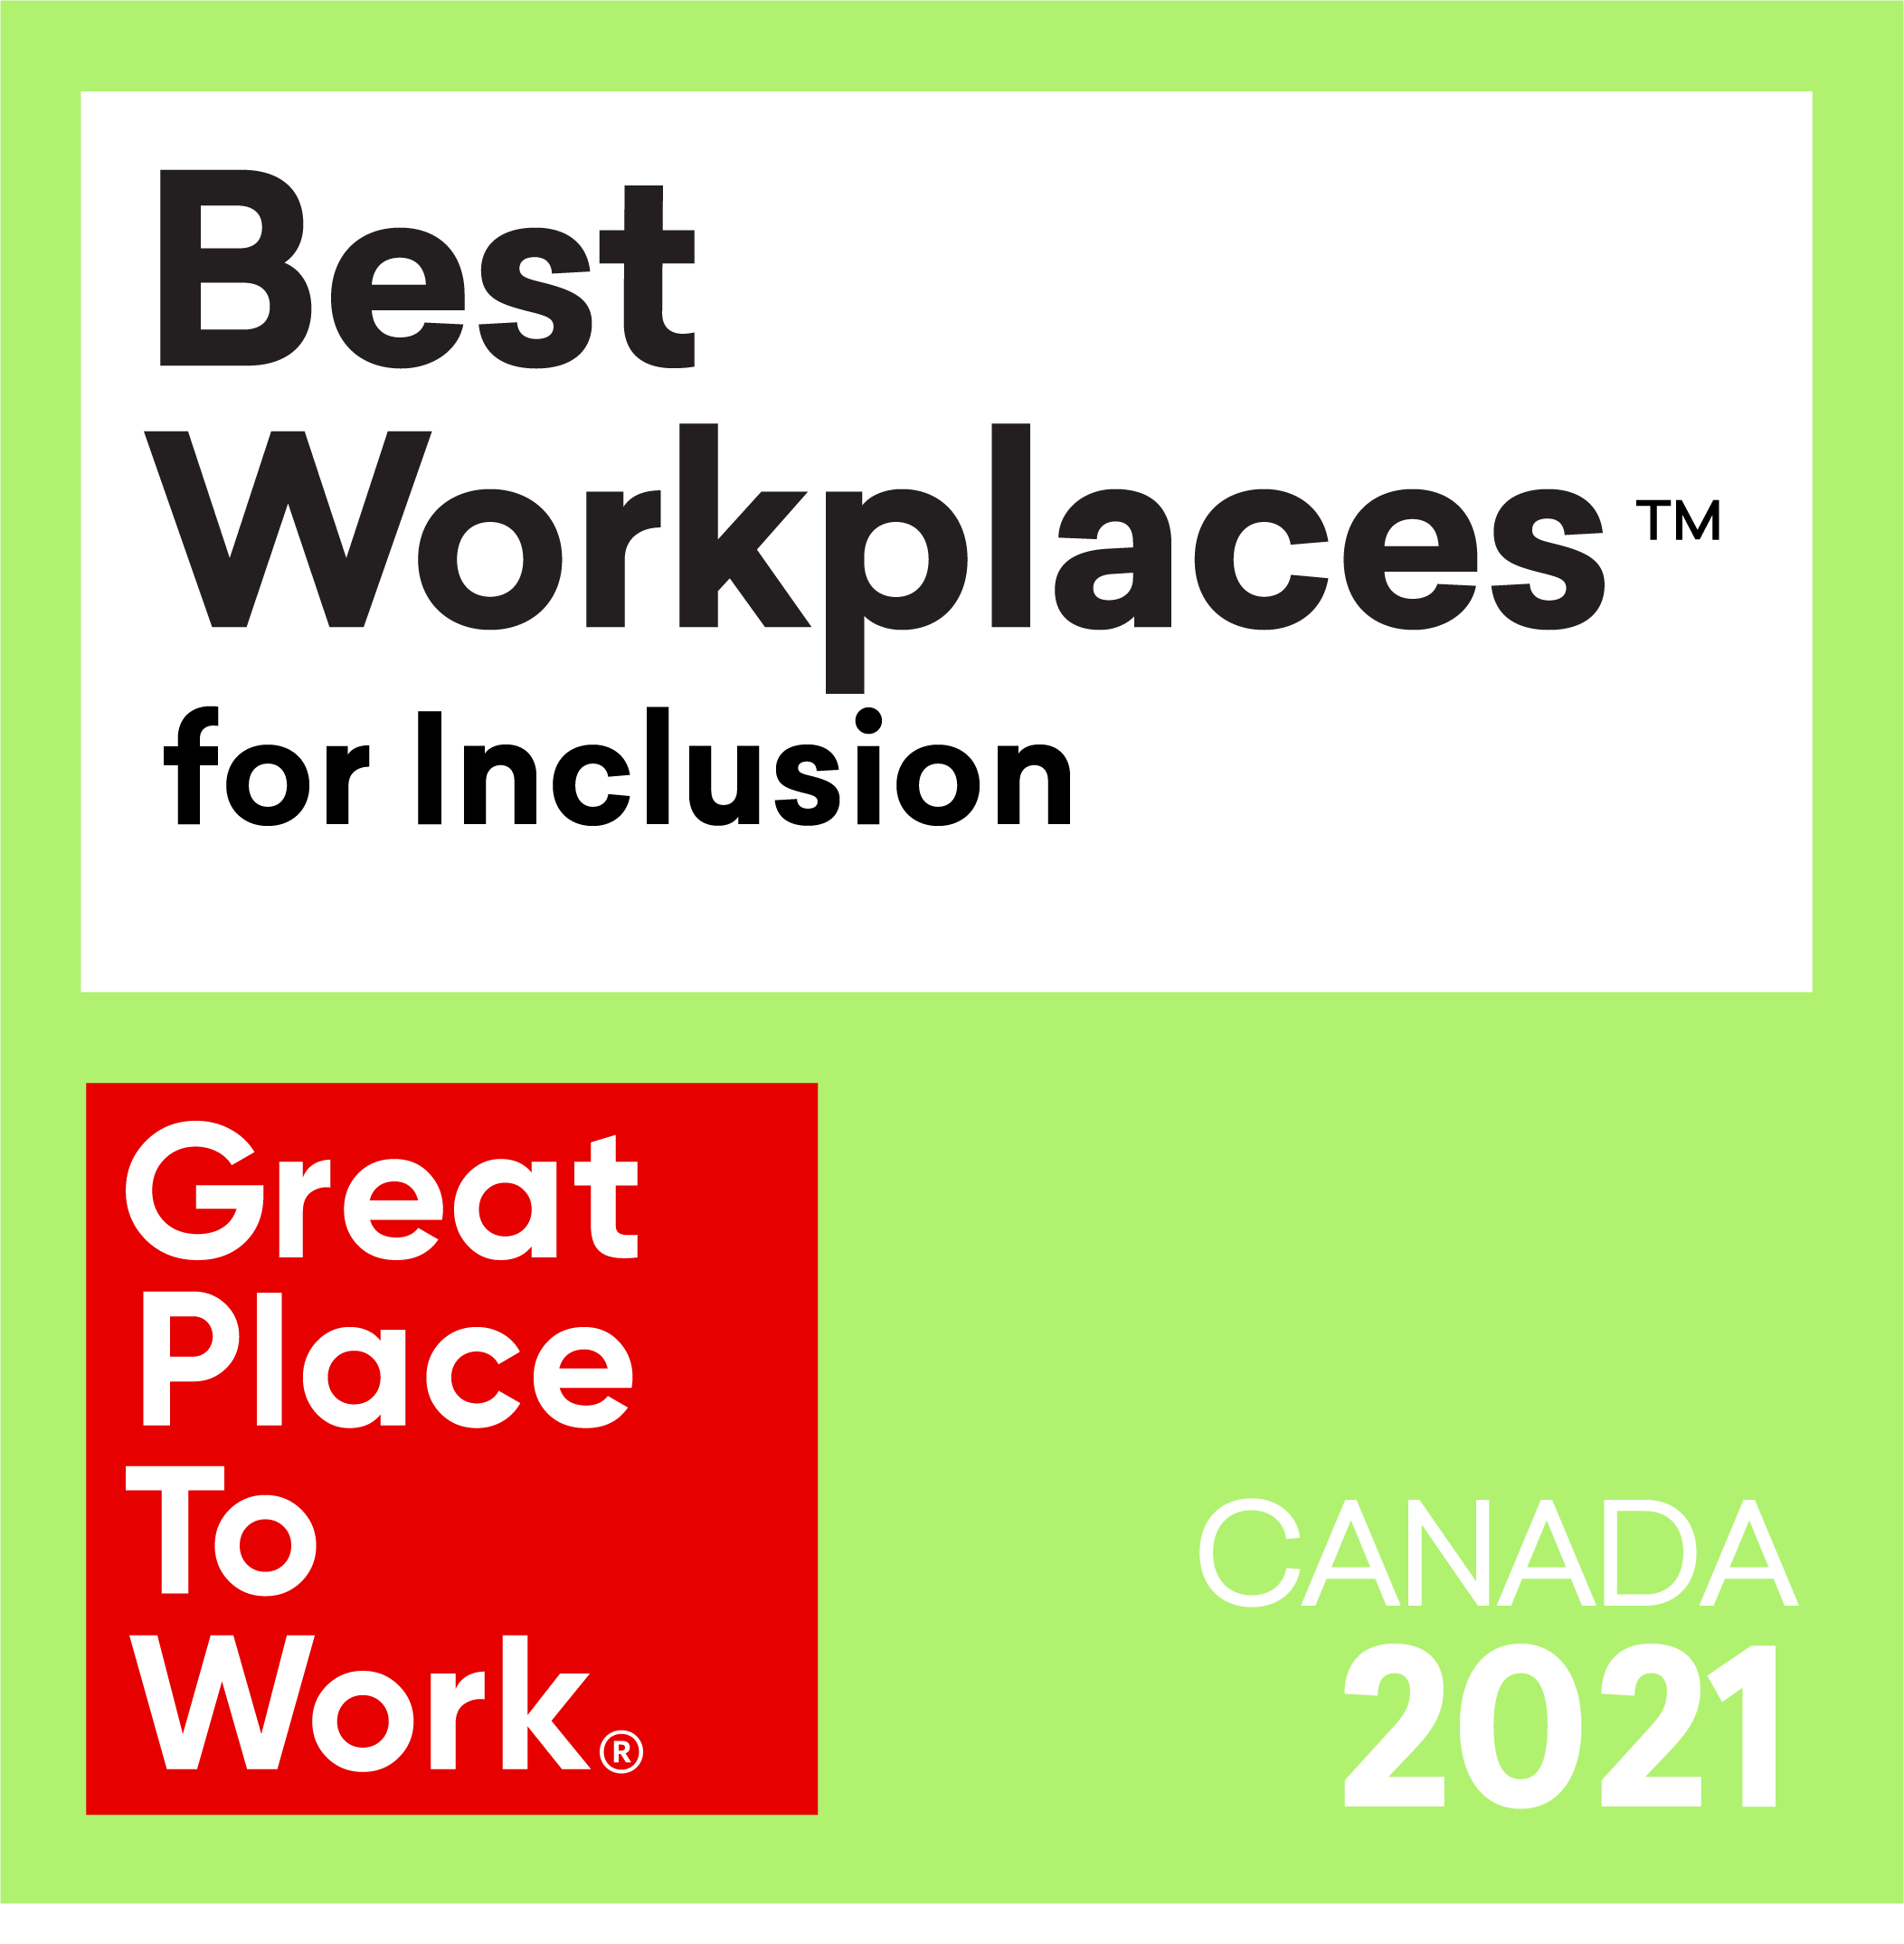 Best Workplaces for Inclusion 2021